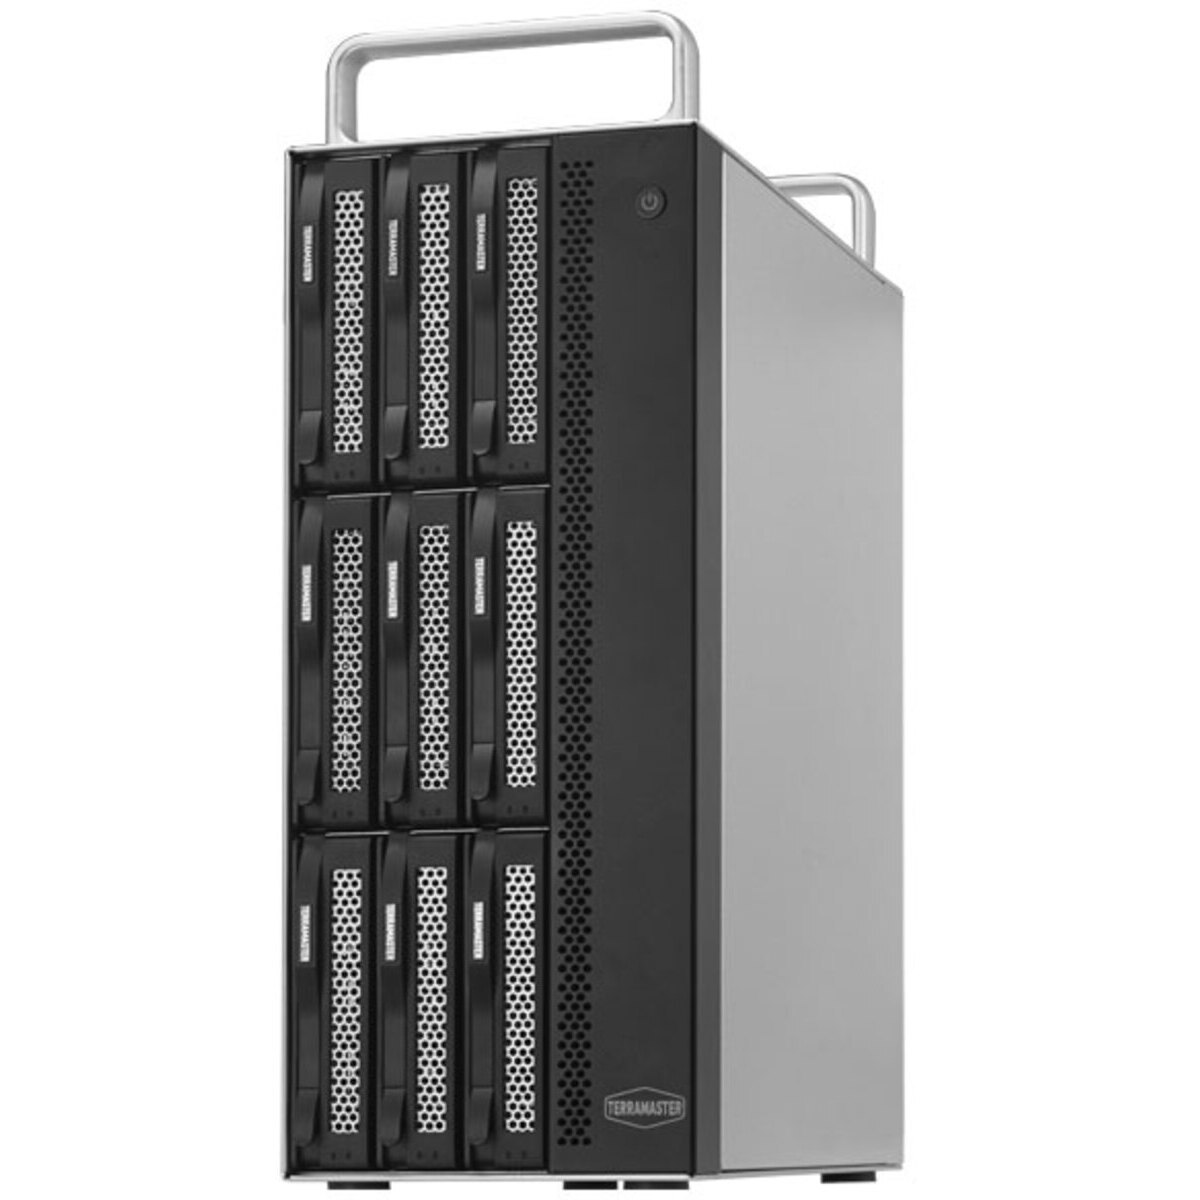 TerraMaster D8-322 28tb 8-Bay Desktop Multimedia / Power User / Business DAS - Direct Attached Storage Device 7x4tb Western Digital Red Pro WD4003FFBX 3.5 7200rpm SATA 6Gb/s HDD NAS Class Drives Installed - Burn-In Tested D8-322